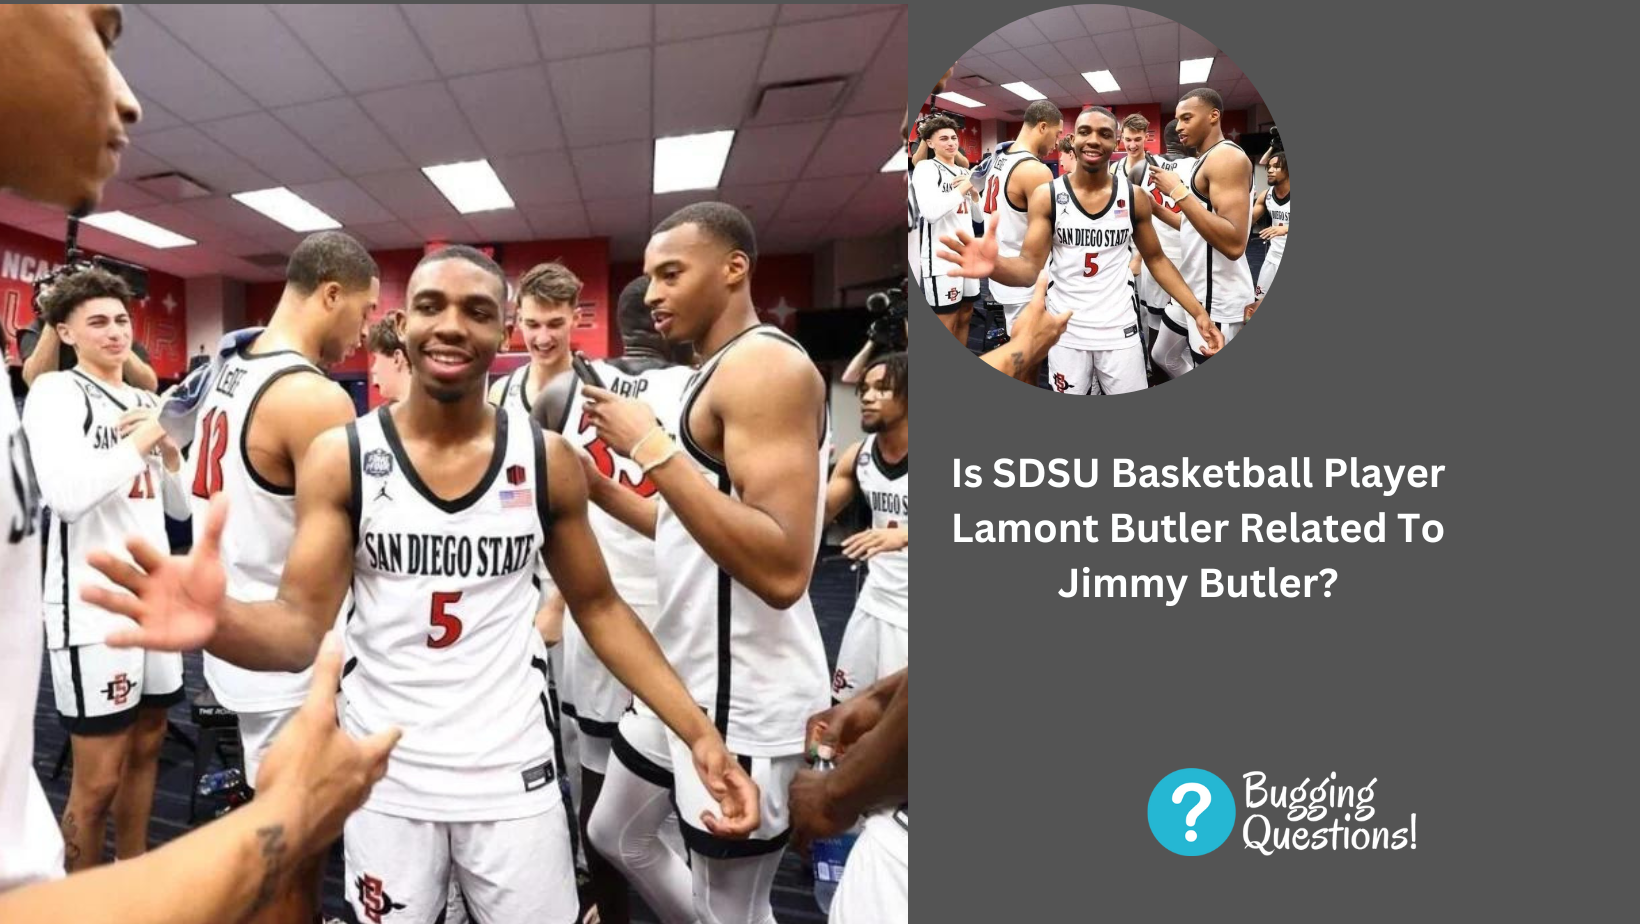 Is SDSU Basketball Player Lamont Butler Related To Jimmy Butler?